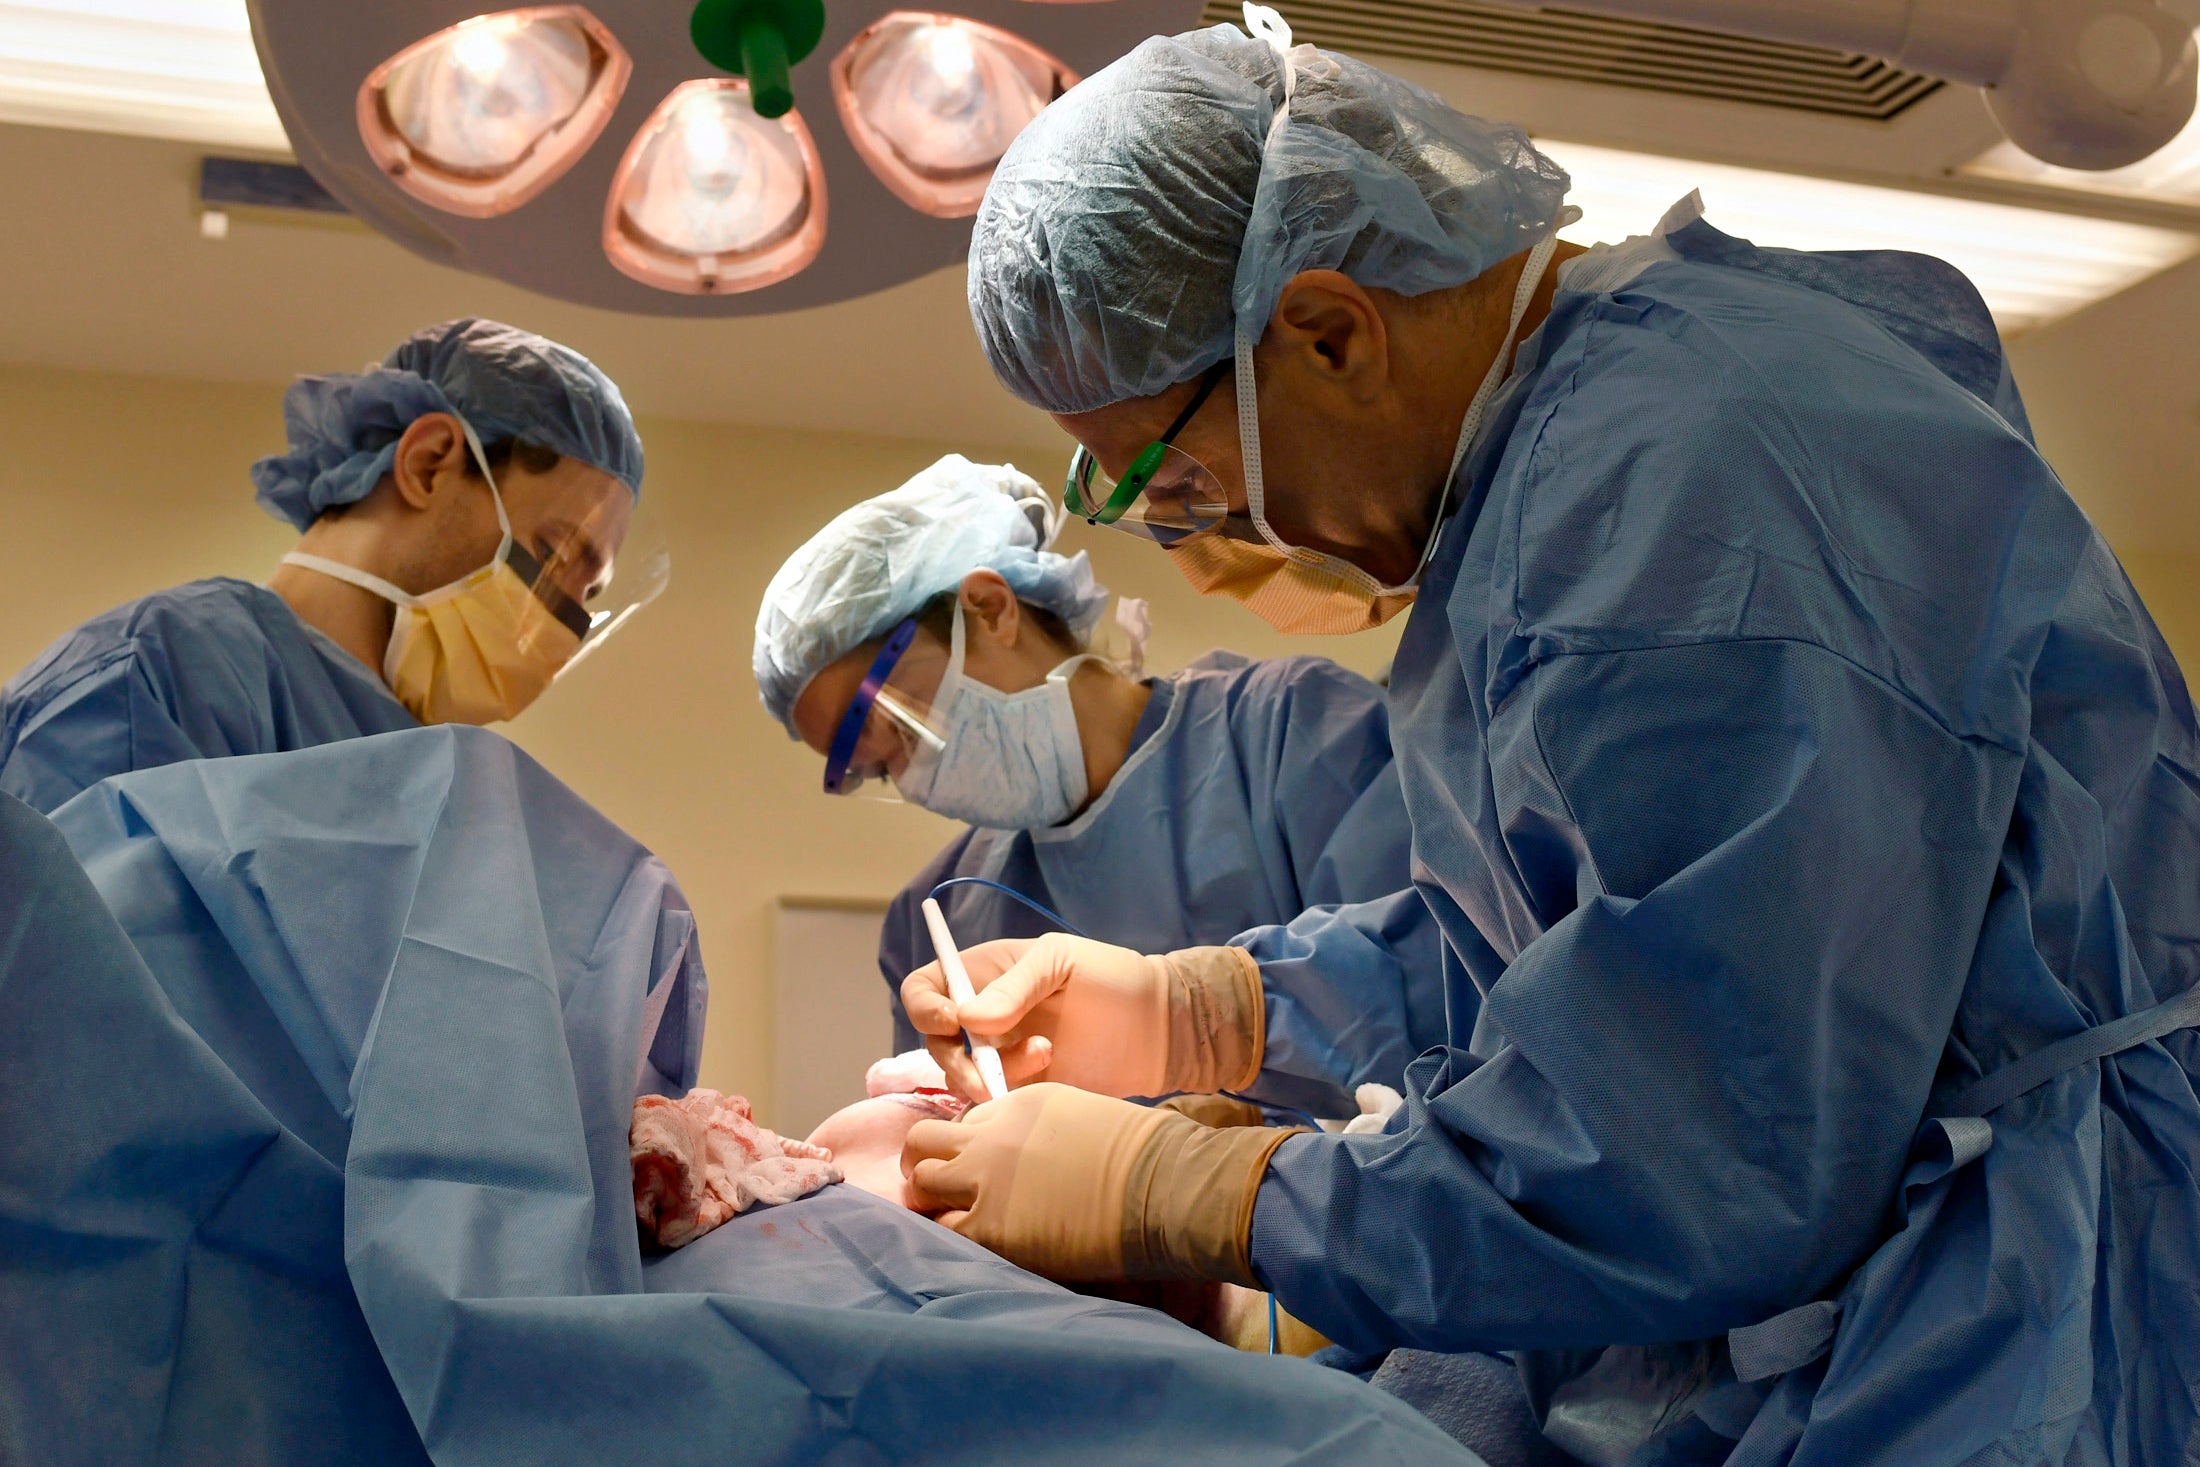 Surgeons perform a bilateral mastectomy on a transgender patient at a hospital in Boston on Friday, July 15, 2016.